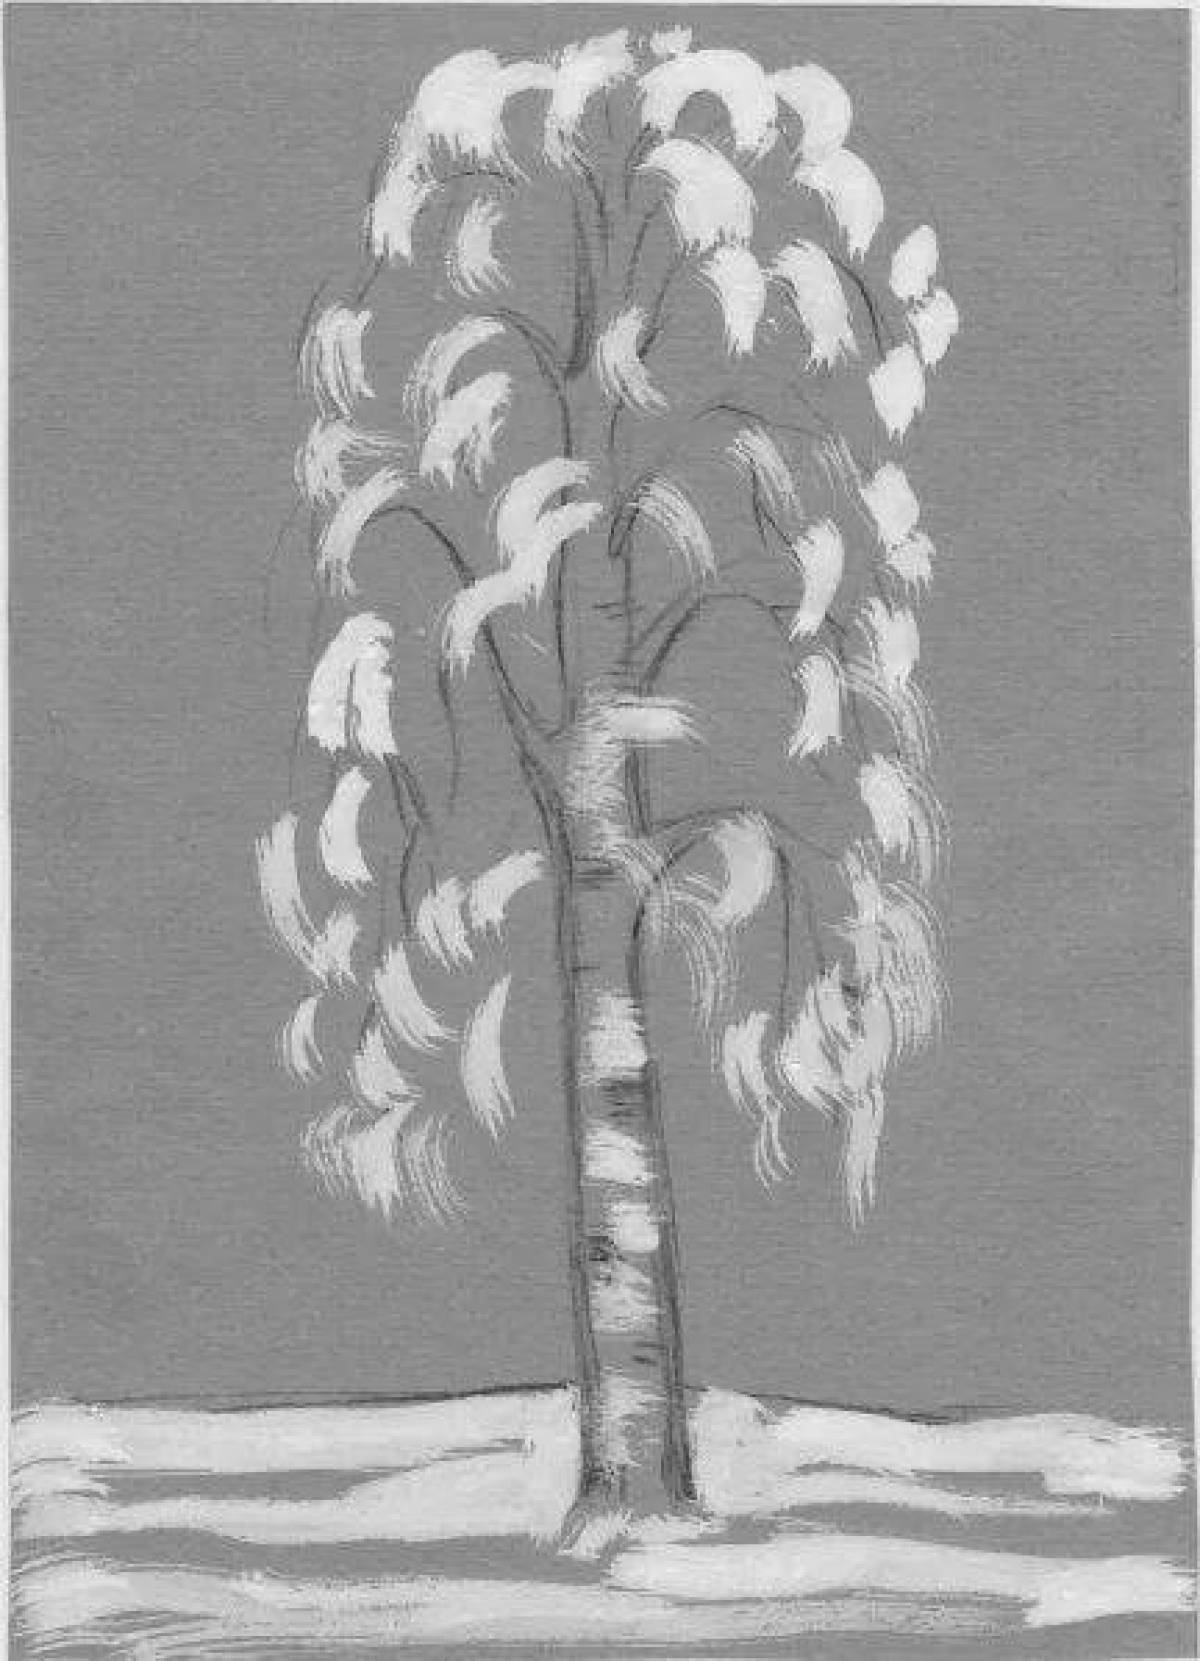 Coloring book magical birch in winter